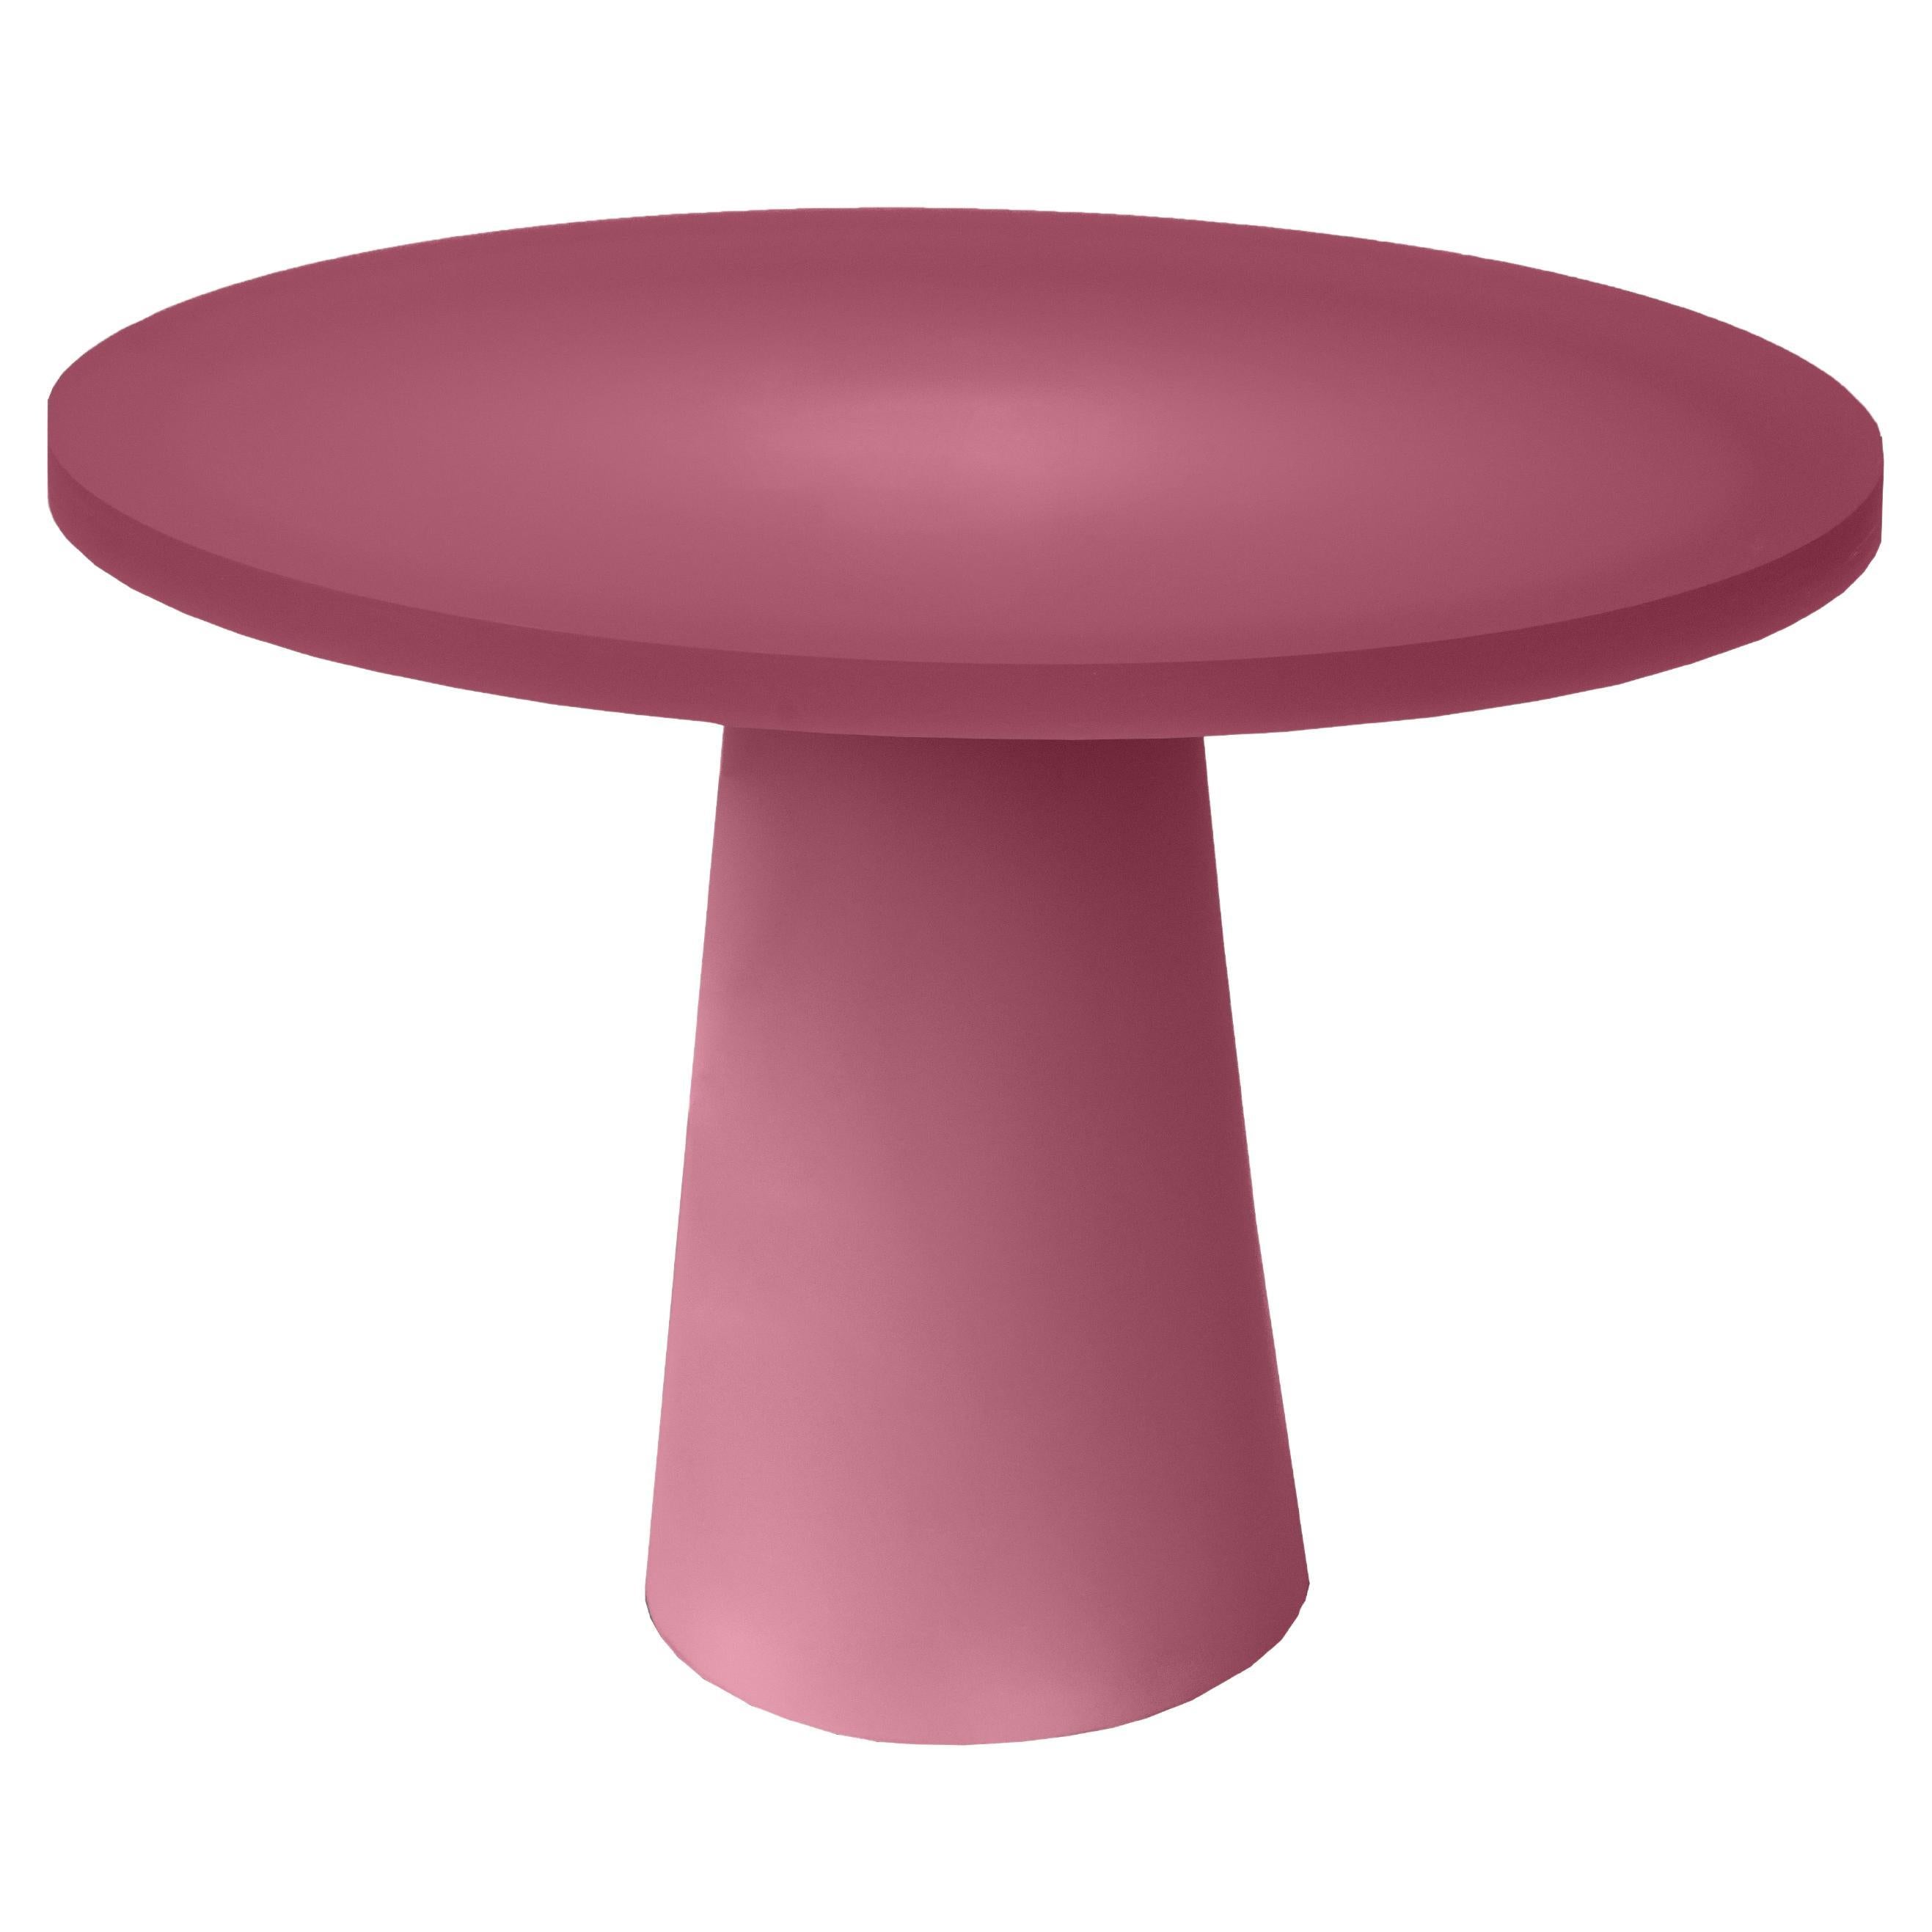 Elliptical Entry Resin Table In Dusty Pink by Facture, REP by Tuleste Factory For Sale